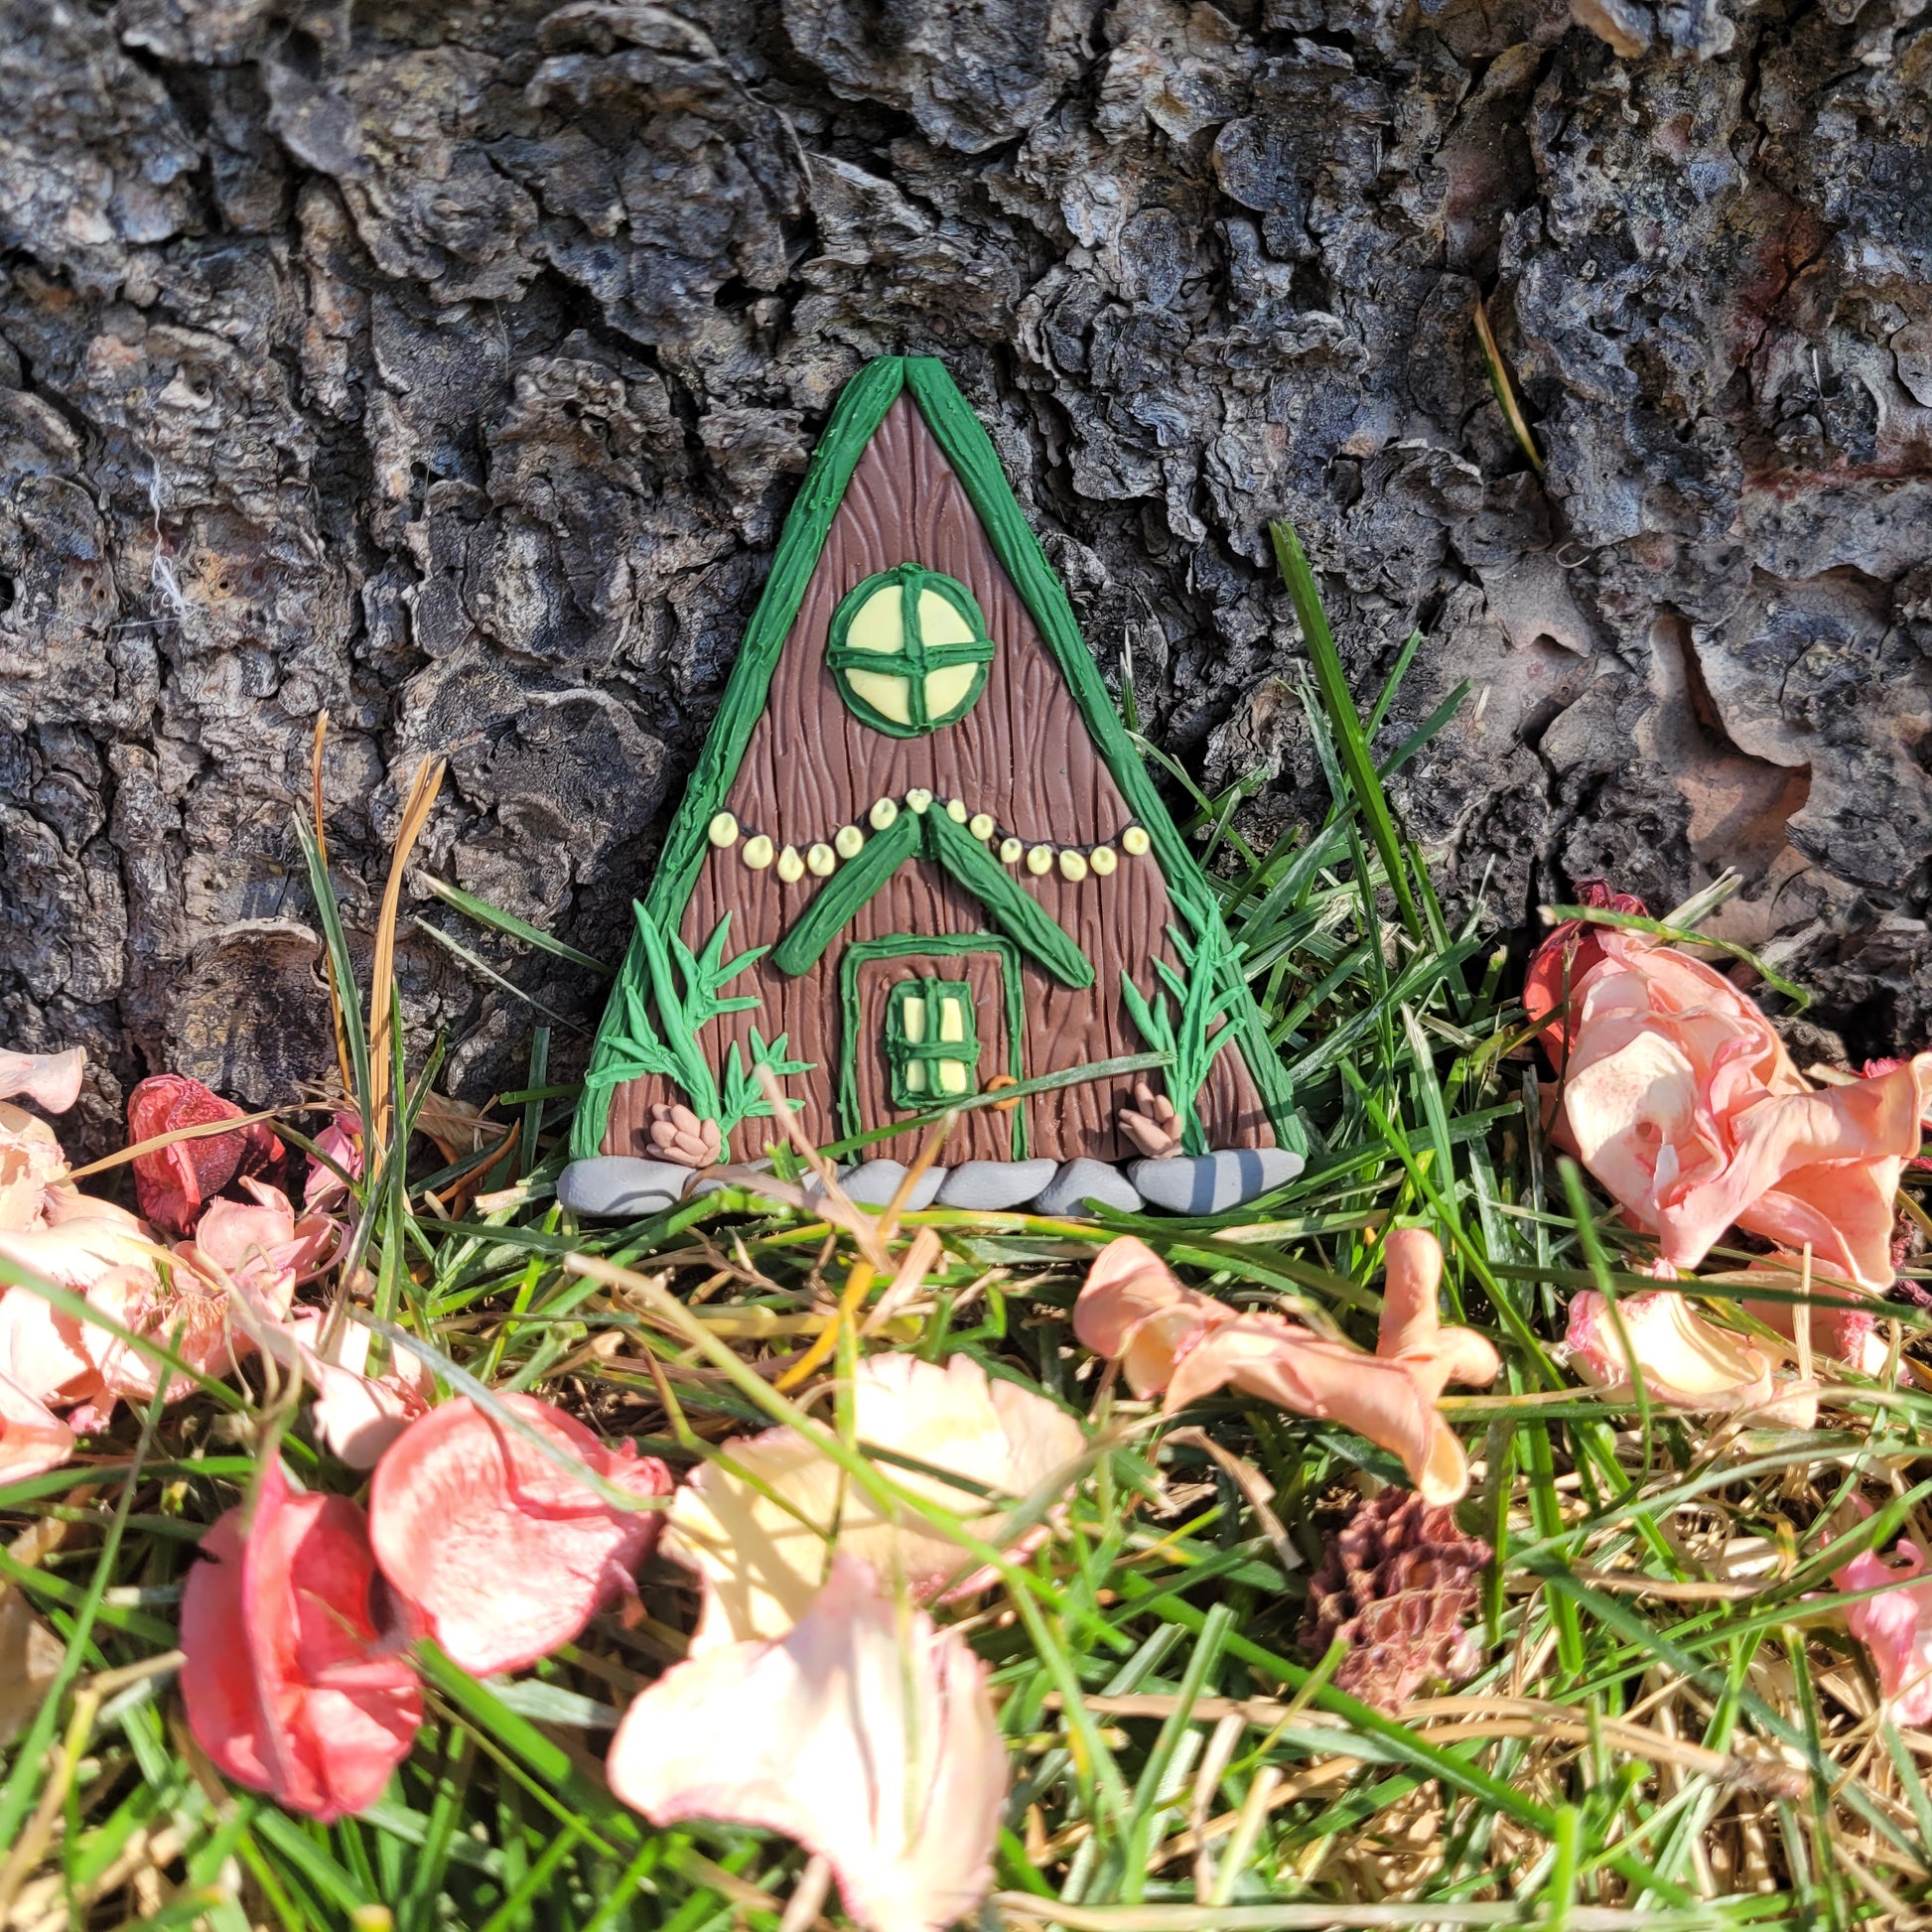 The alpine cabin fairy door rests against the bark of a tree outside surrounded by green grass and pink flower petals. It is brown with a forest green roof and detailed with a window, fairy lights, door, spruce sprigs and pinecones.